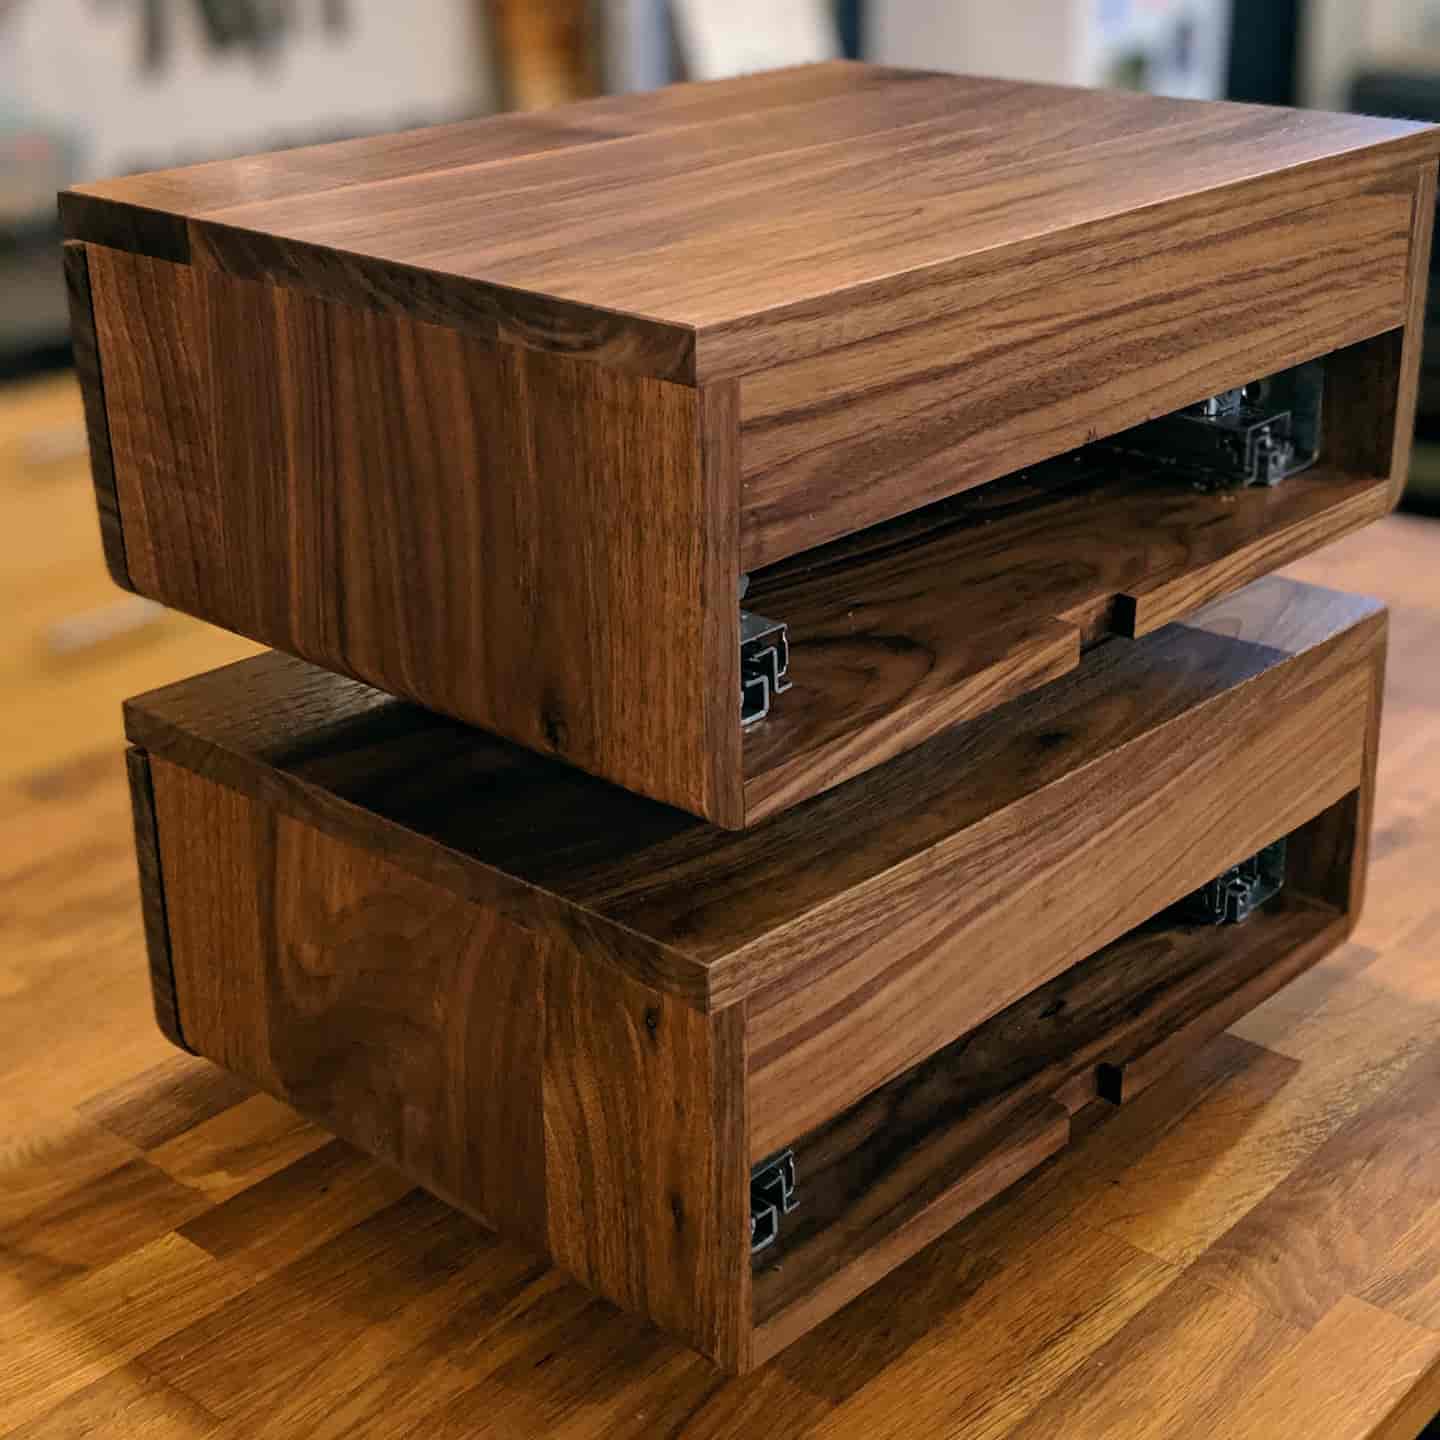 Back view of floating side tables